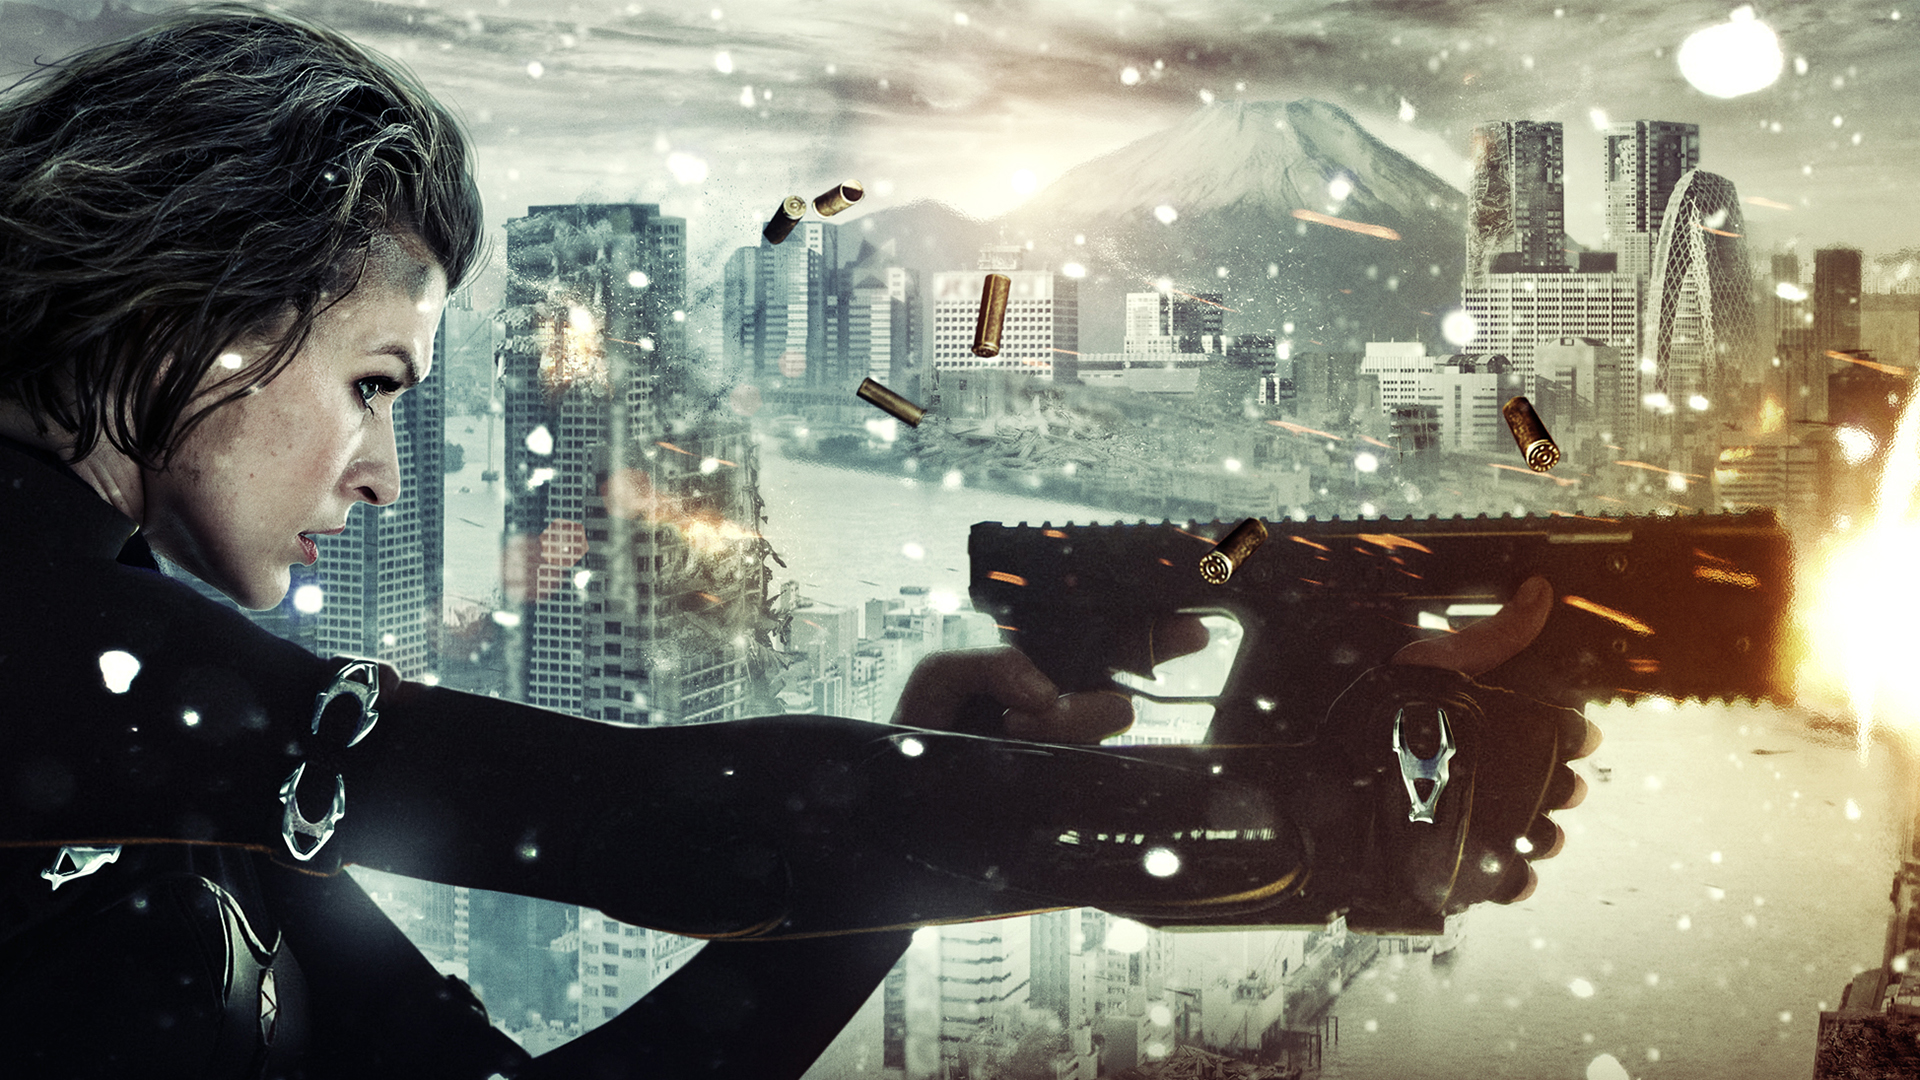 Resident Evil: Retribution exclusive wallpapers | Movie Wallpapers